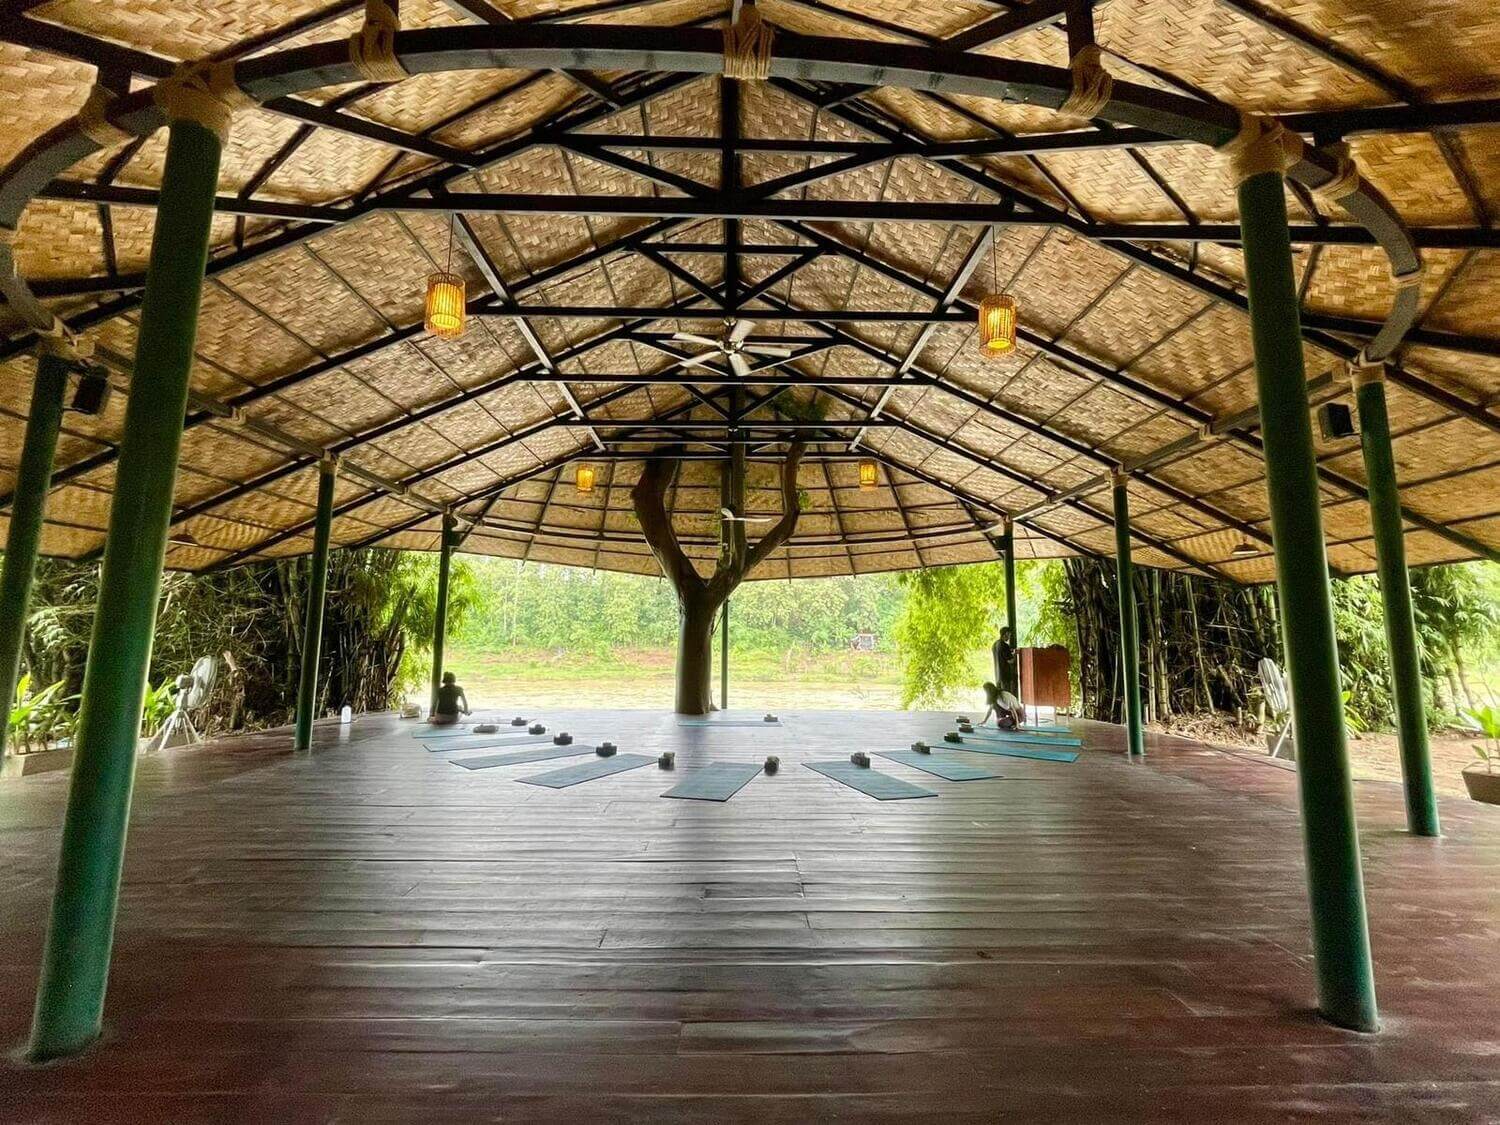 In the enchanting city of Luang Prabang, discover a tranquil yoga room adorned with a beautiful wooden floor, where you can find solace in your practice amidst the calming presence of